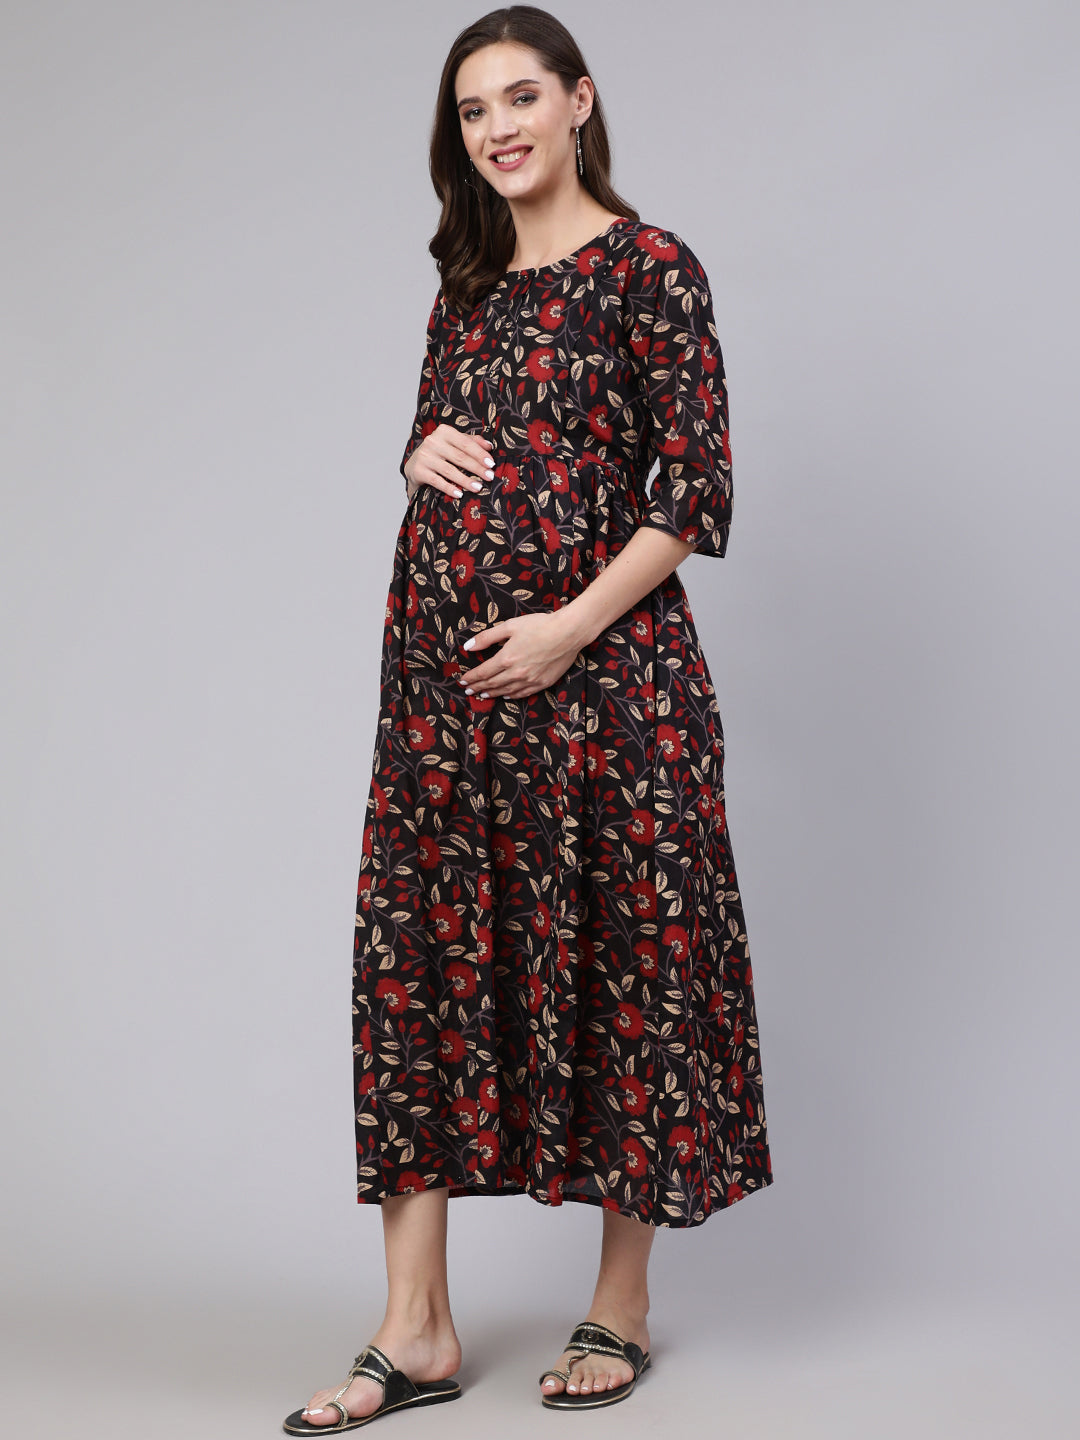 Women's Black Floral Printed Flared Maternity Dress - Nayo Clothing